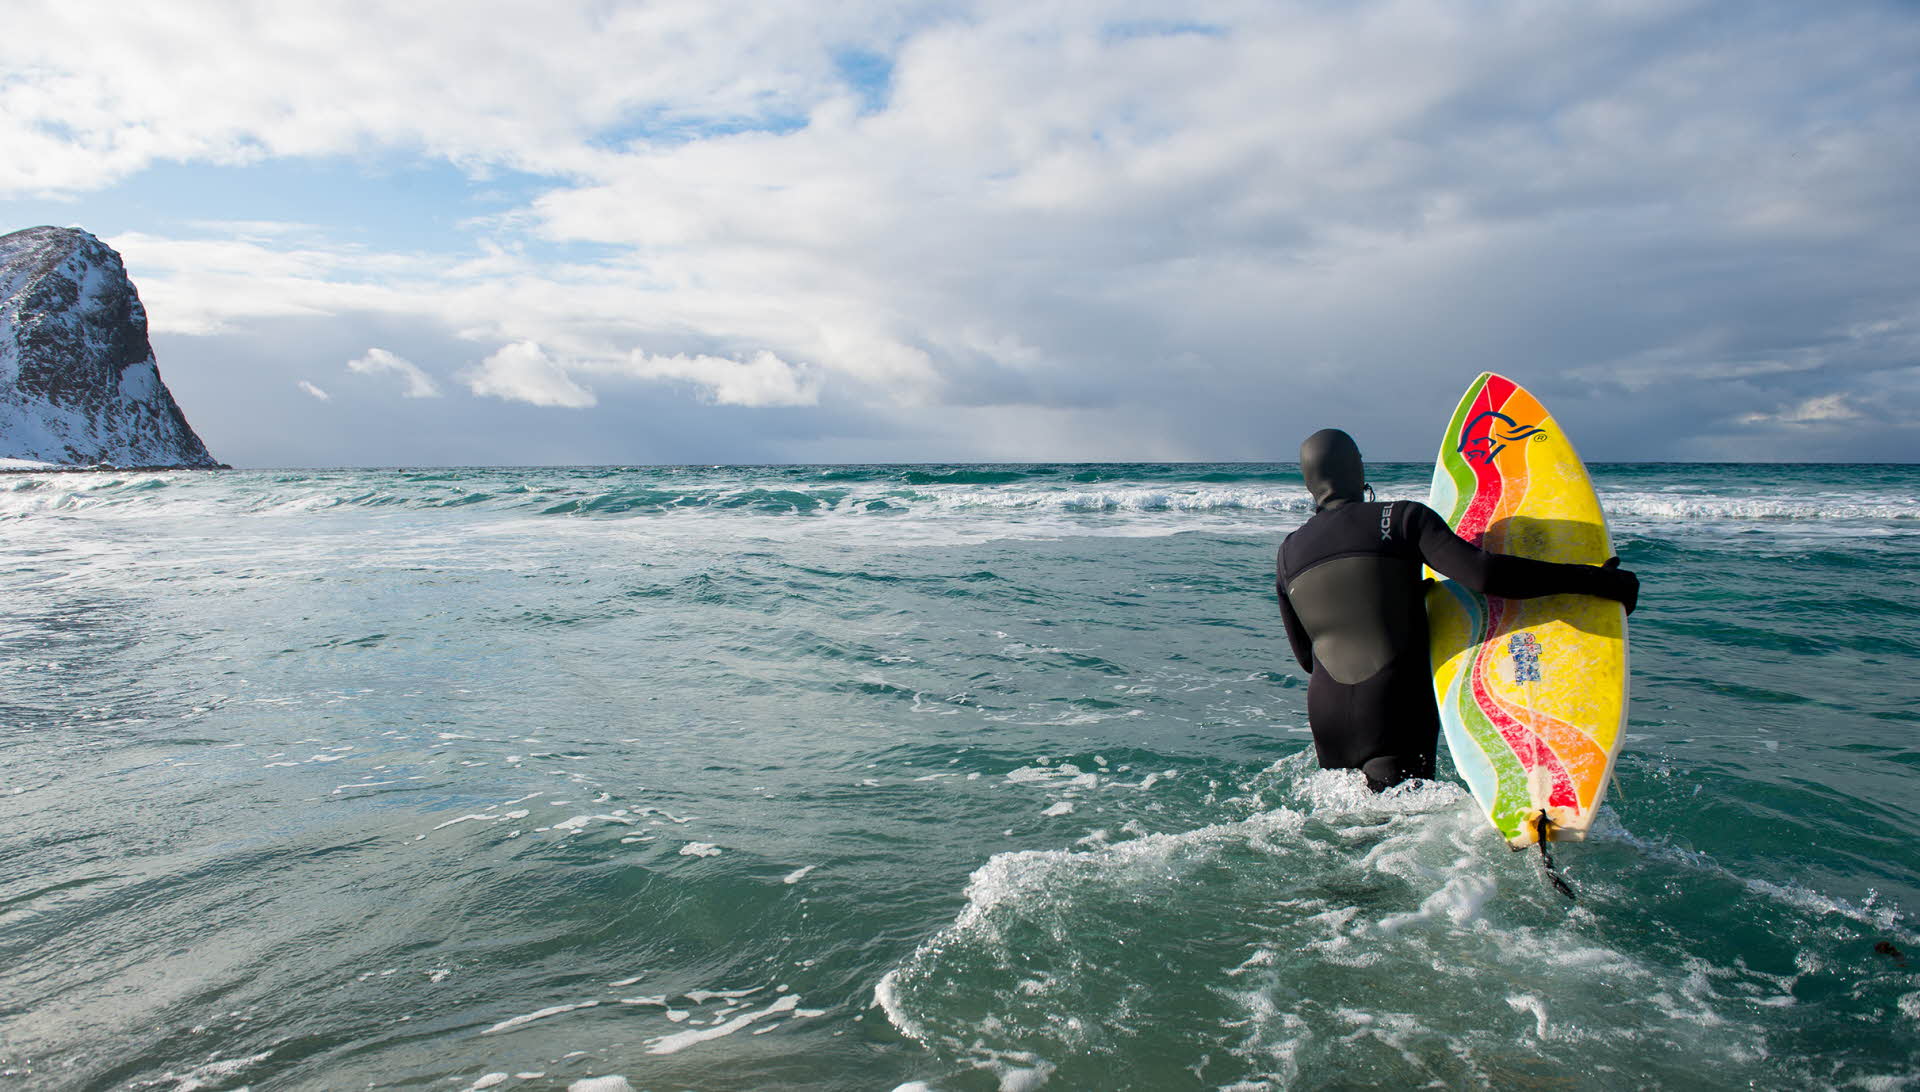 A surfer in a dry suit entering the sea. Mountain to the left.